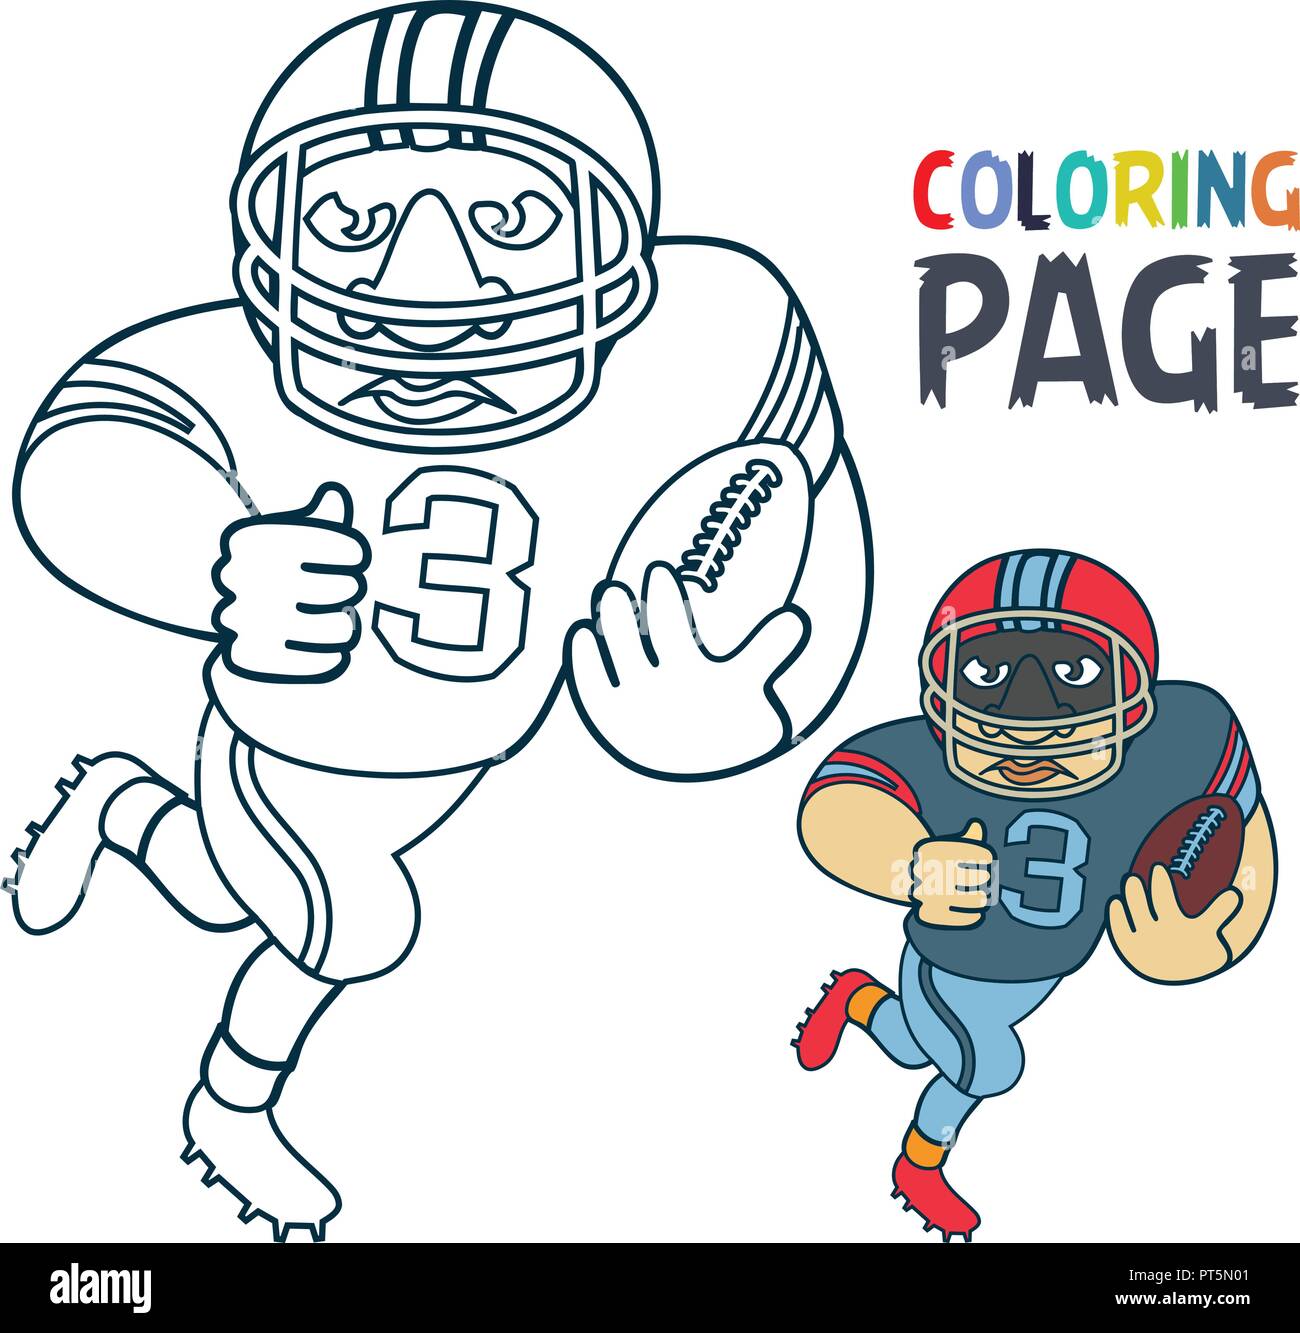 coloring page with rugby football player cartoon Stock Vector